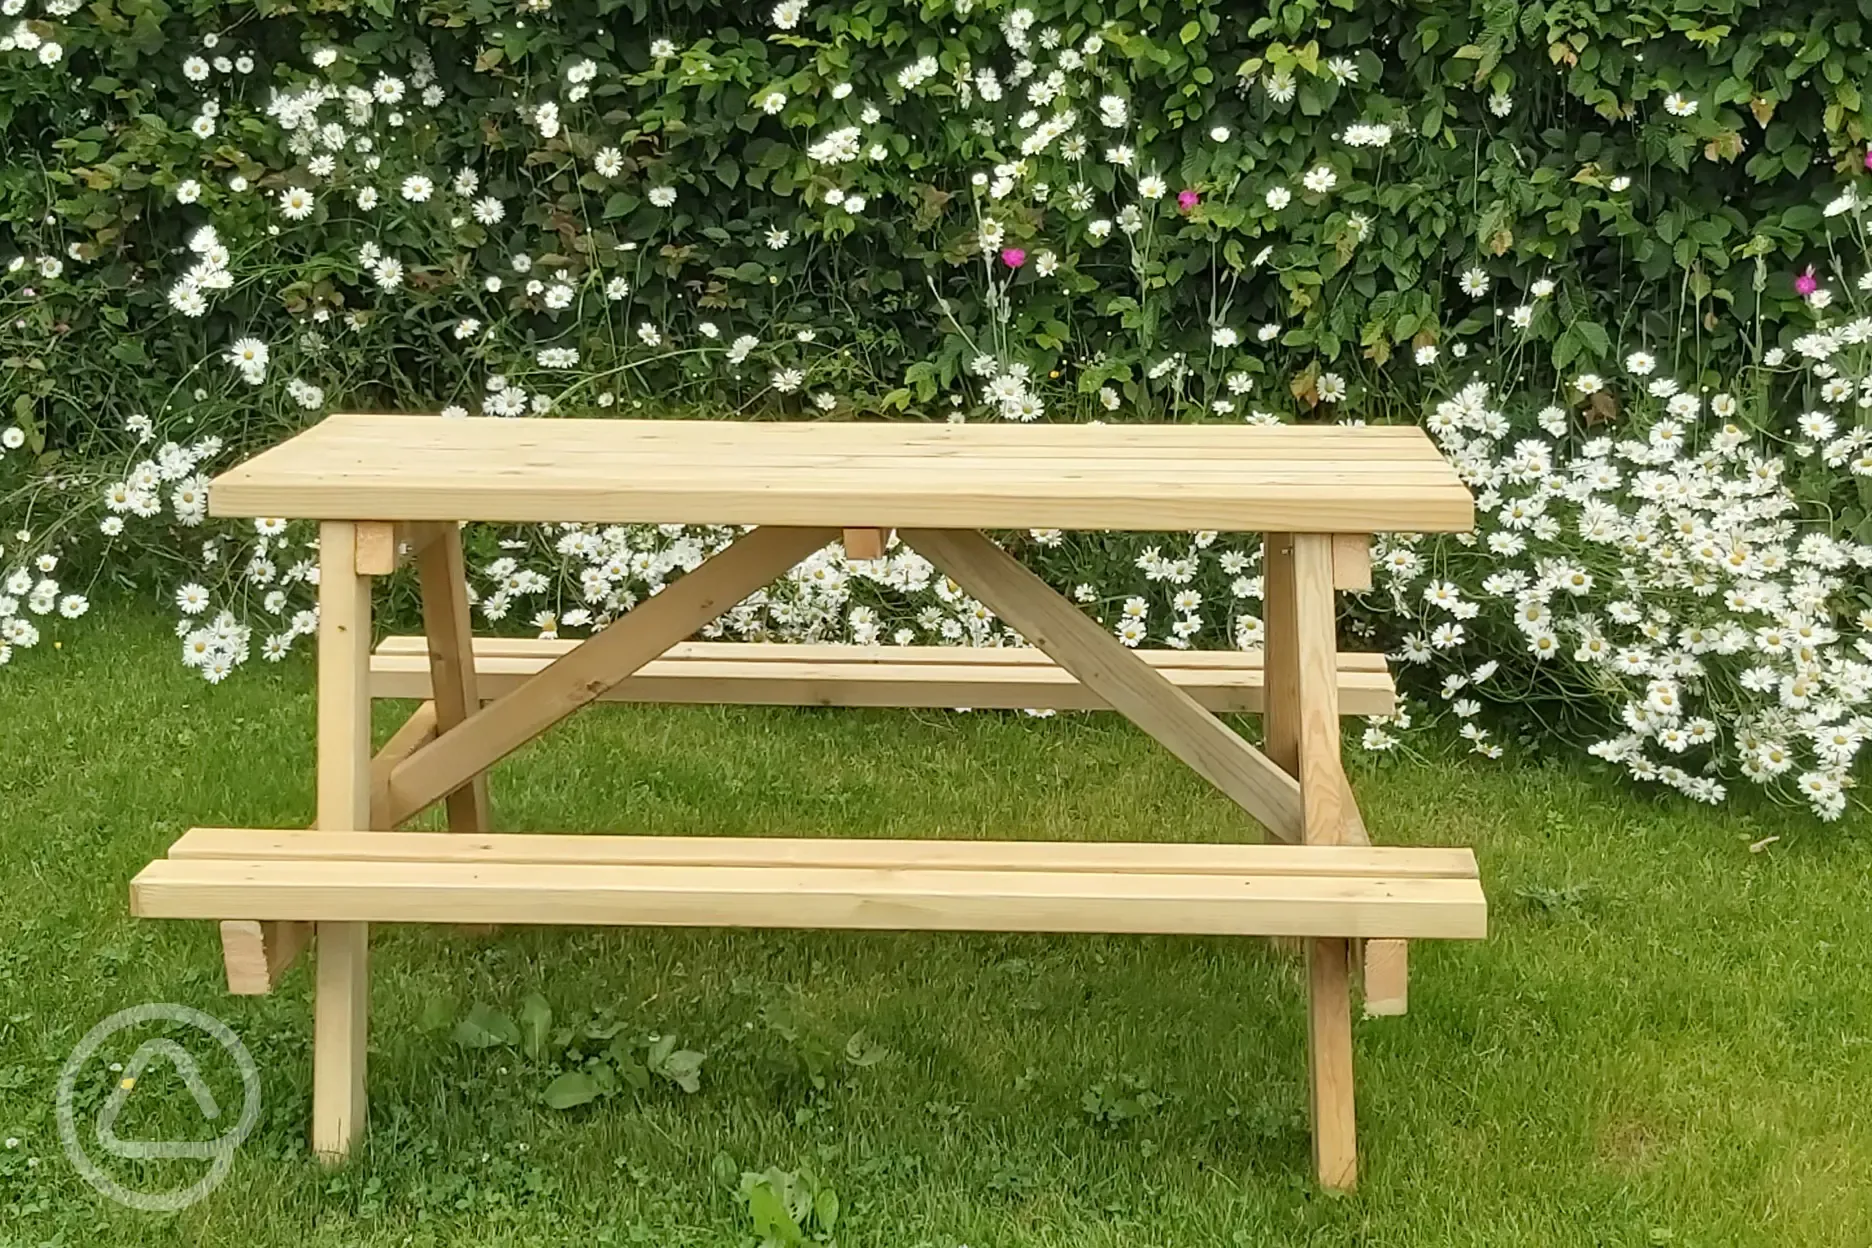 We have locally built wooden picnic benches for hire